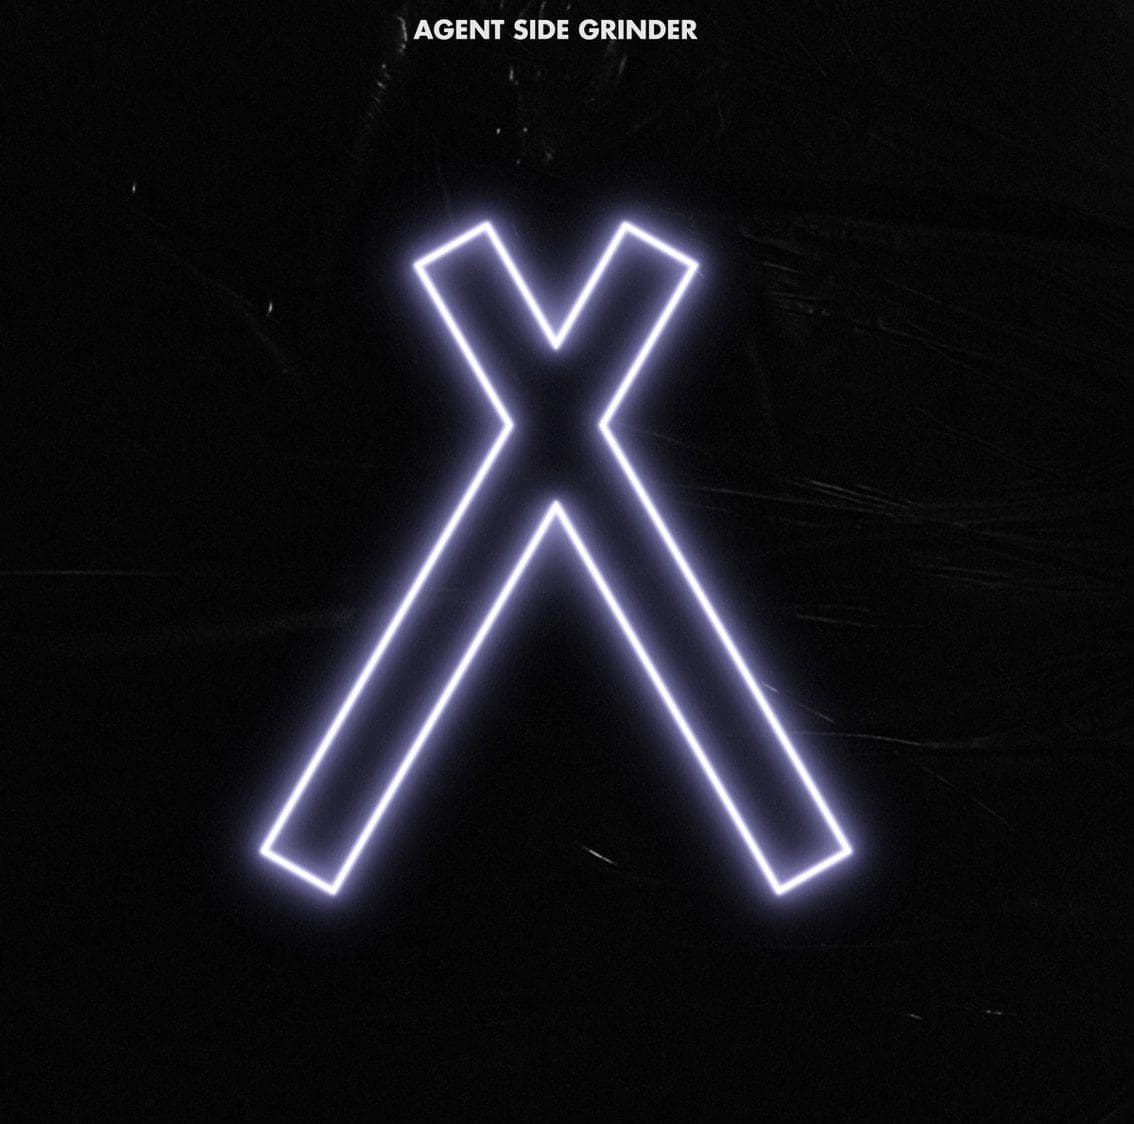 Agent Side Grinder returns with all new album: 'A/X' - available now on CD and vinyl